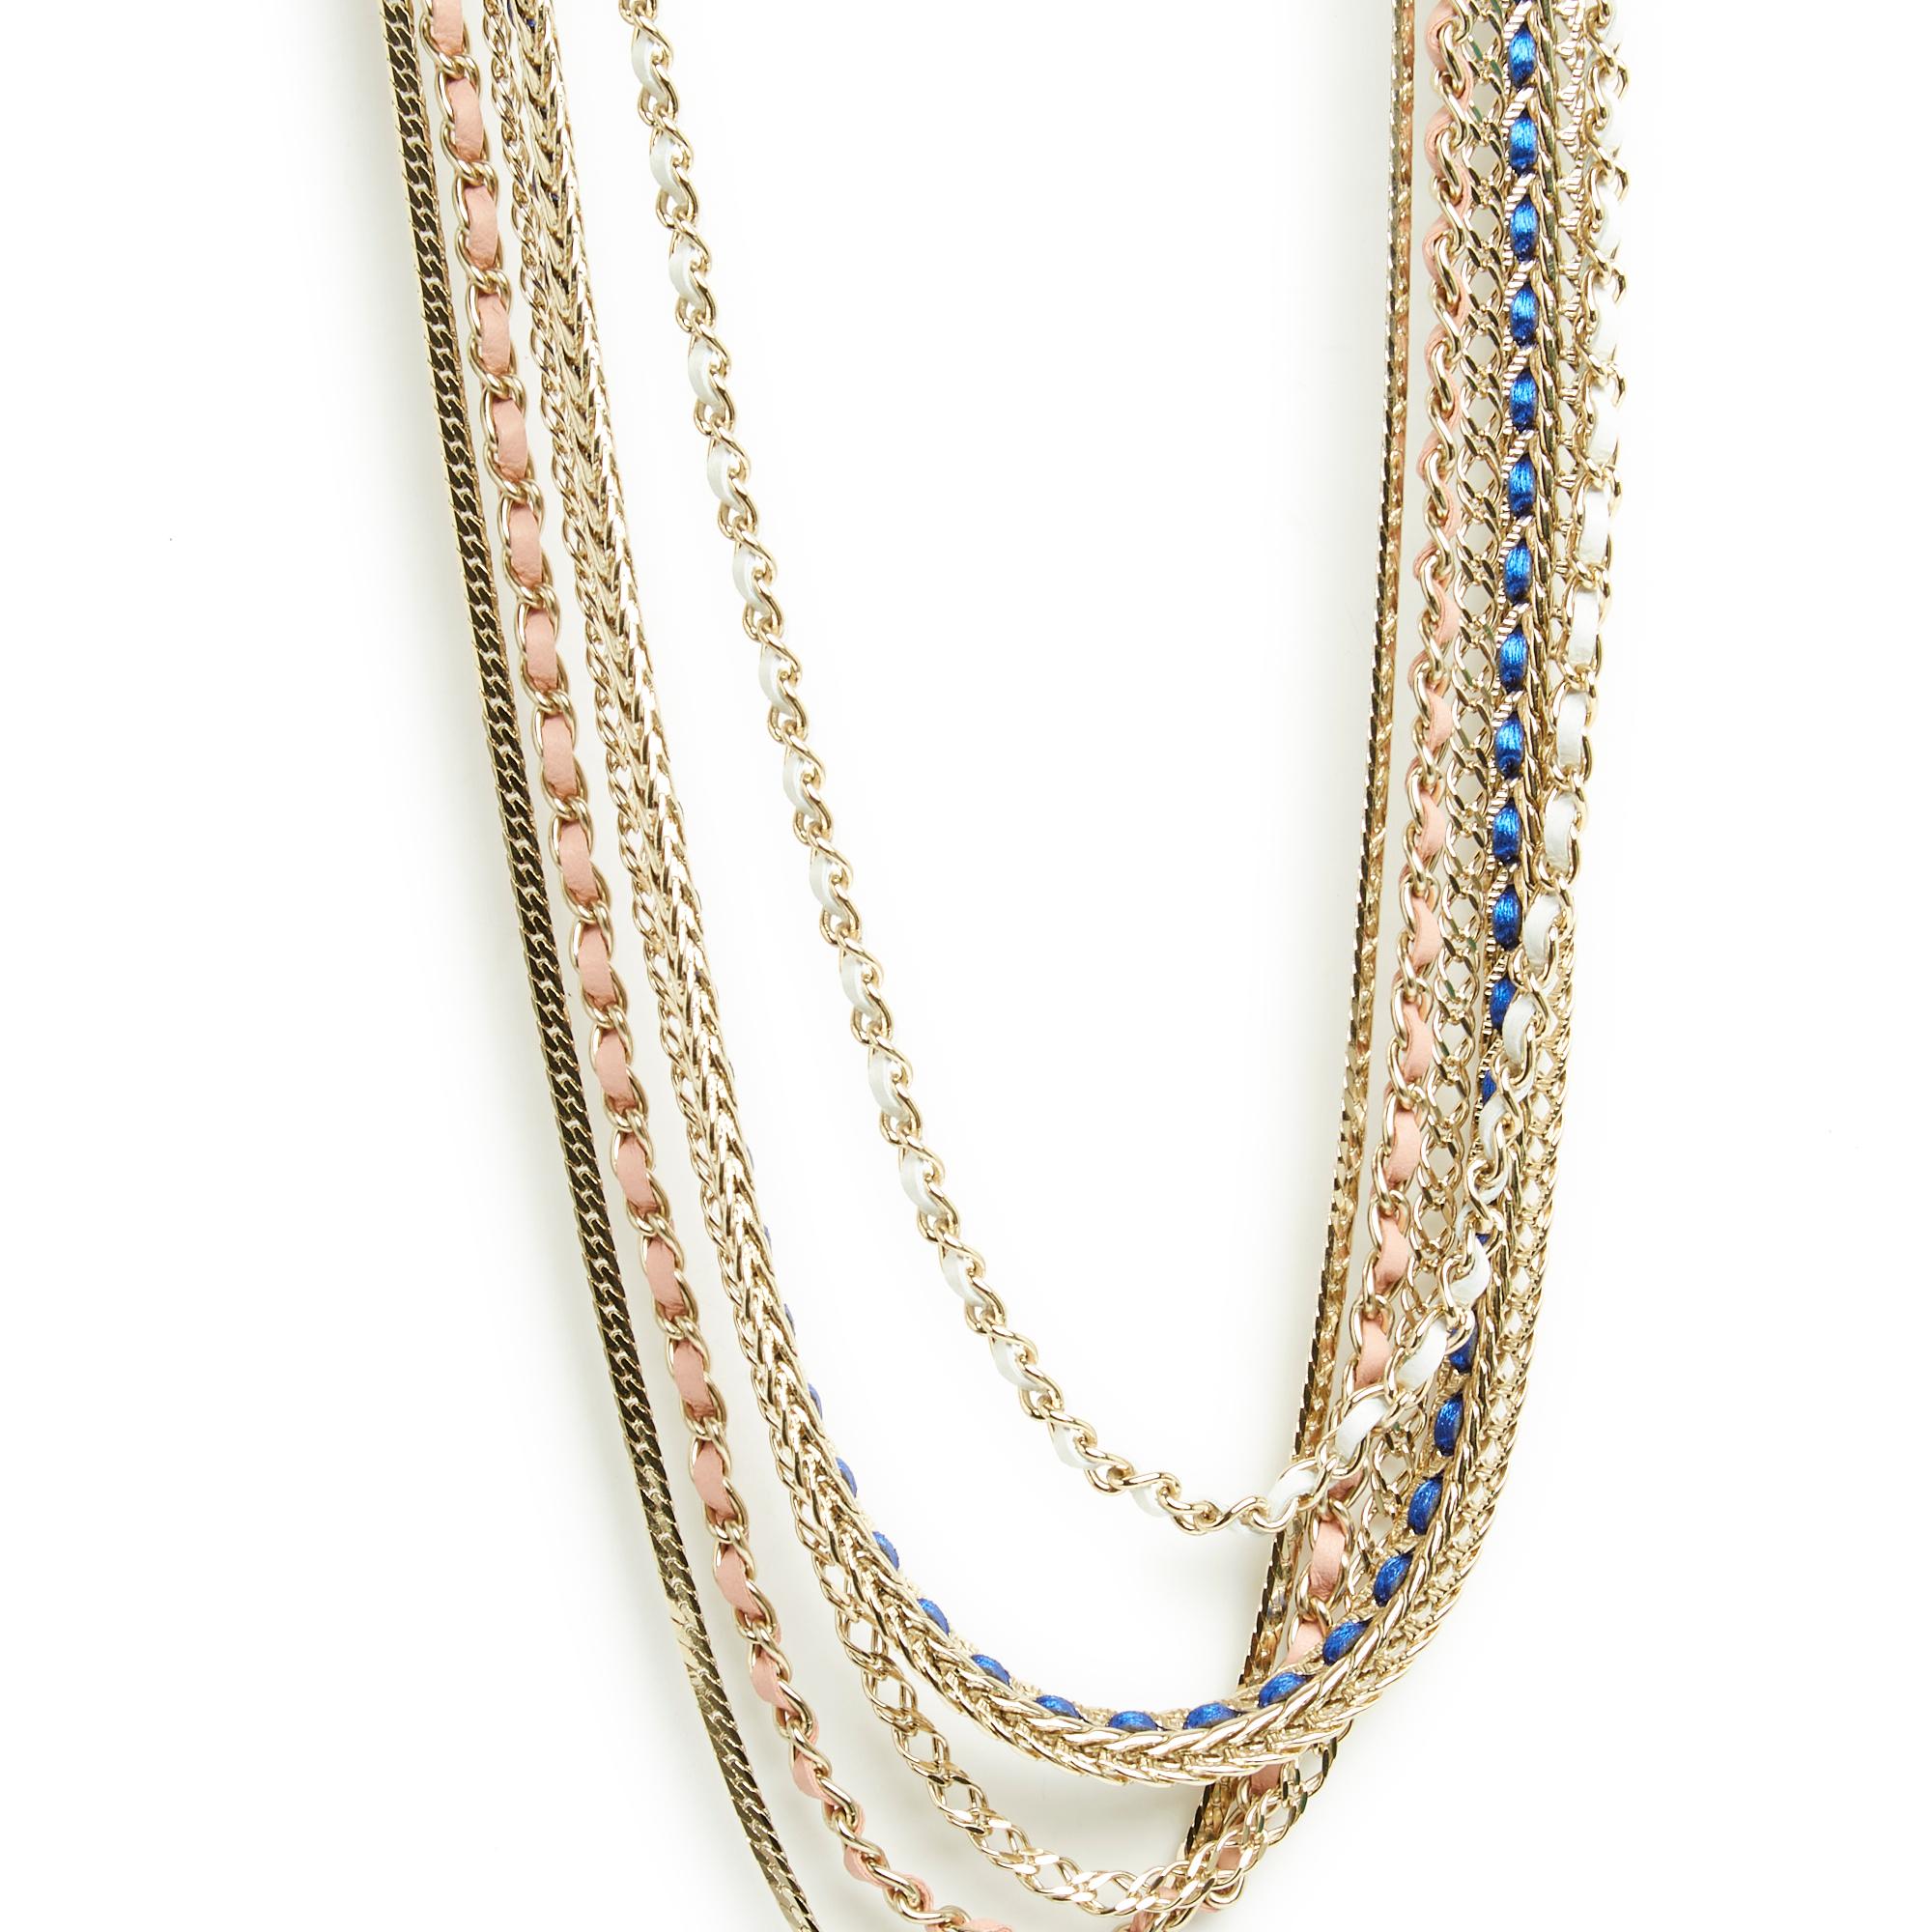 Chanel necklace Spring Summer 2022 collection string necklace composed of 5 long chains, some double, some intertwined with pink, blue or white leather interspersed with 2 large Chanel CC acronyms inlaid with white rhinestones, closure with a